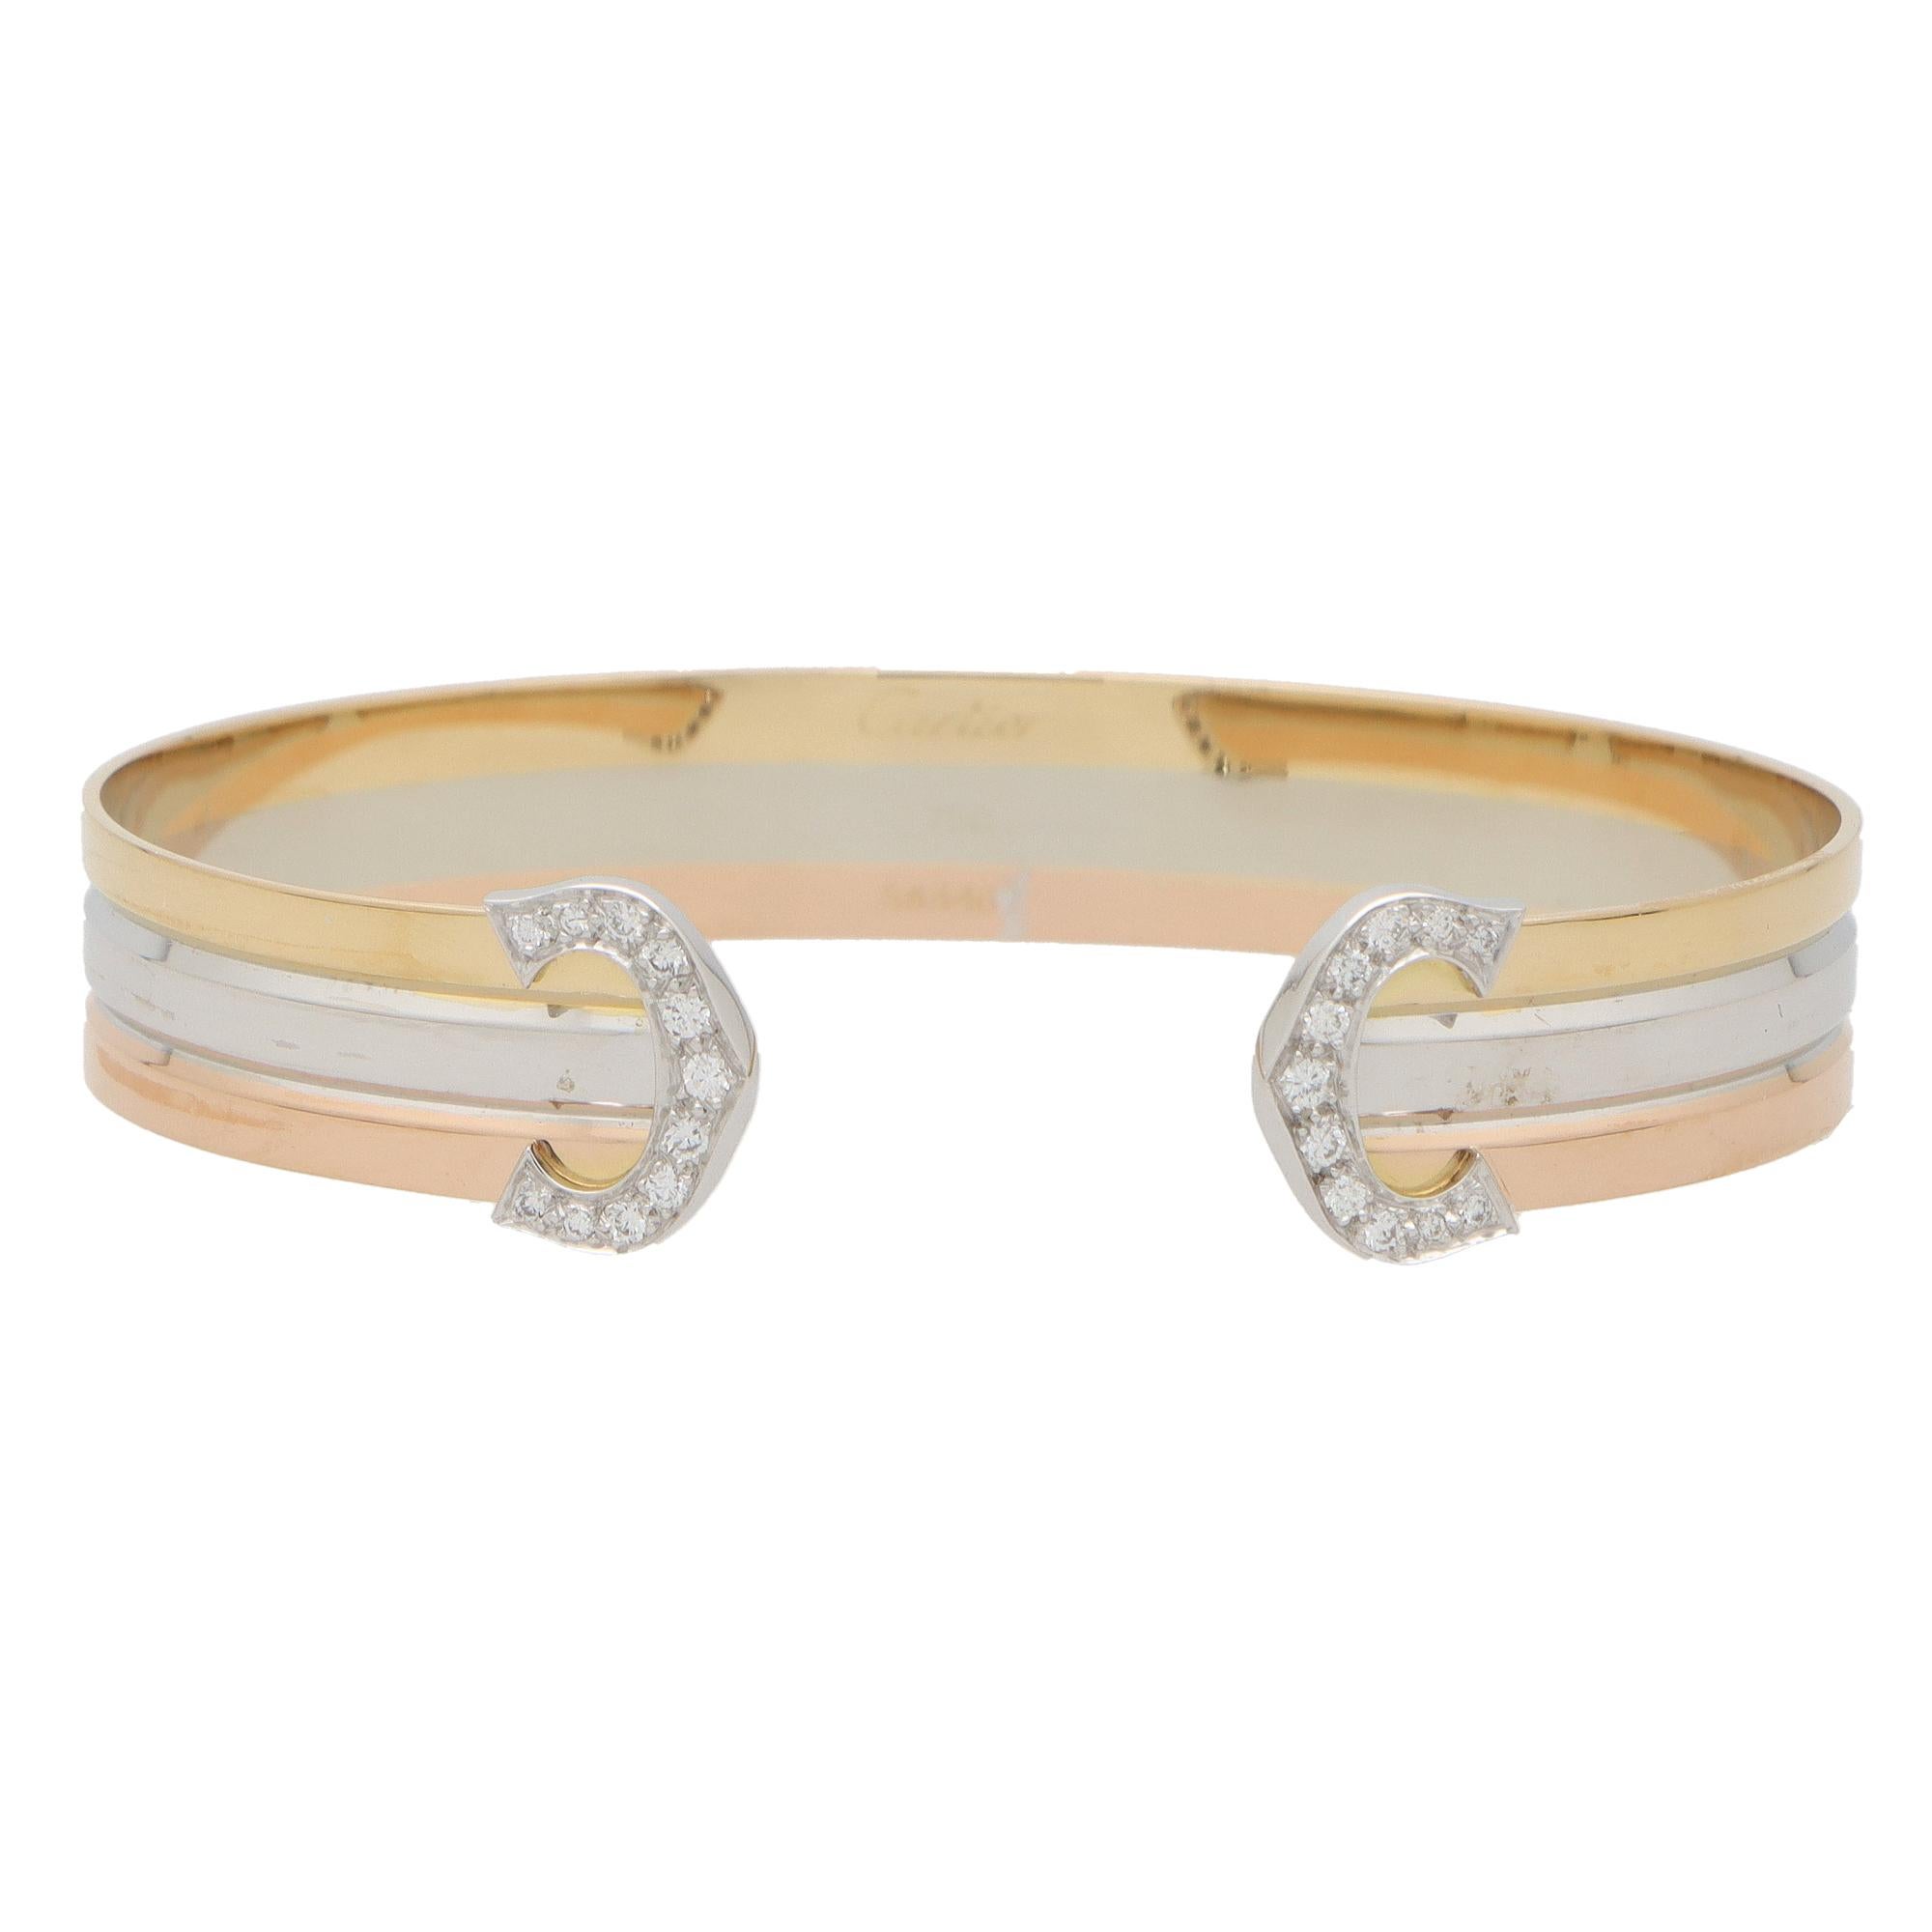 Retro Vintage Cartier Diamond Double C Bangle in 18k Rose, Yellow and White Gold